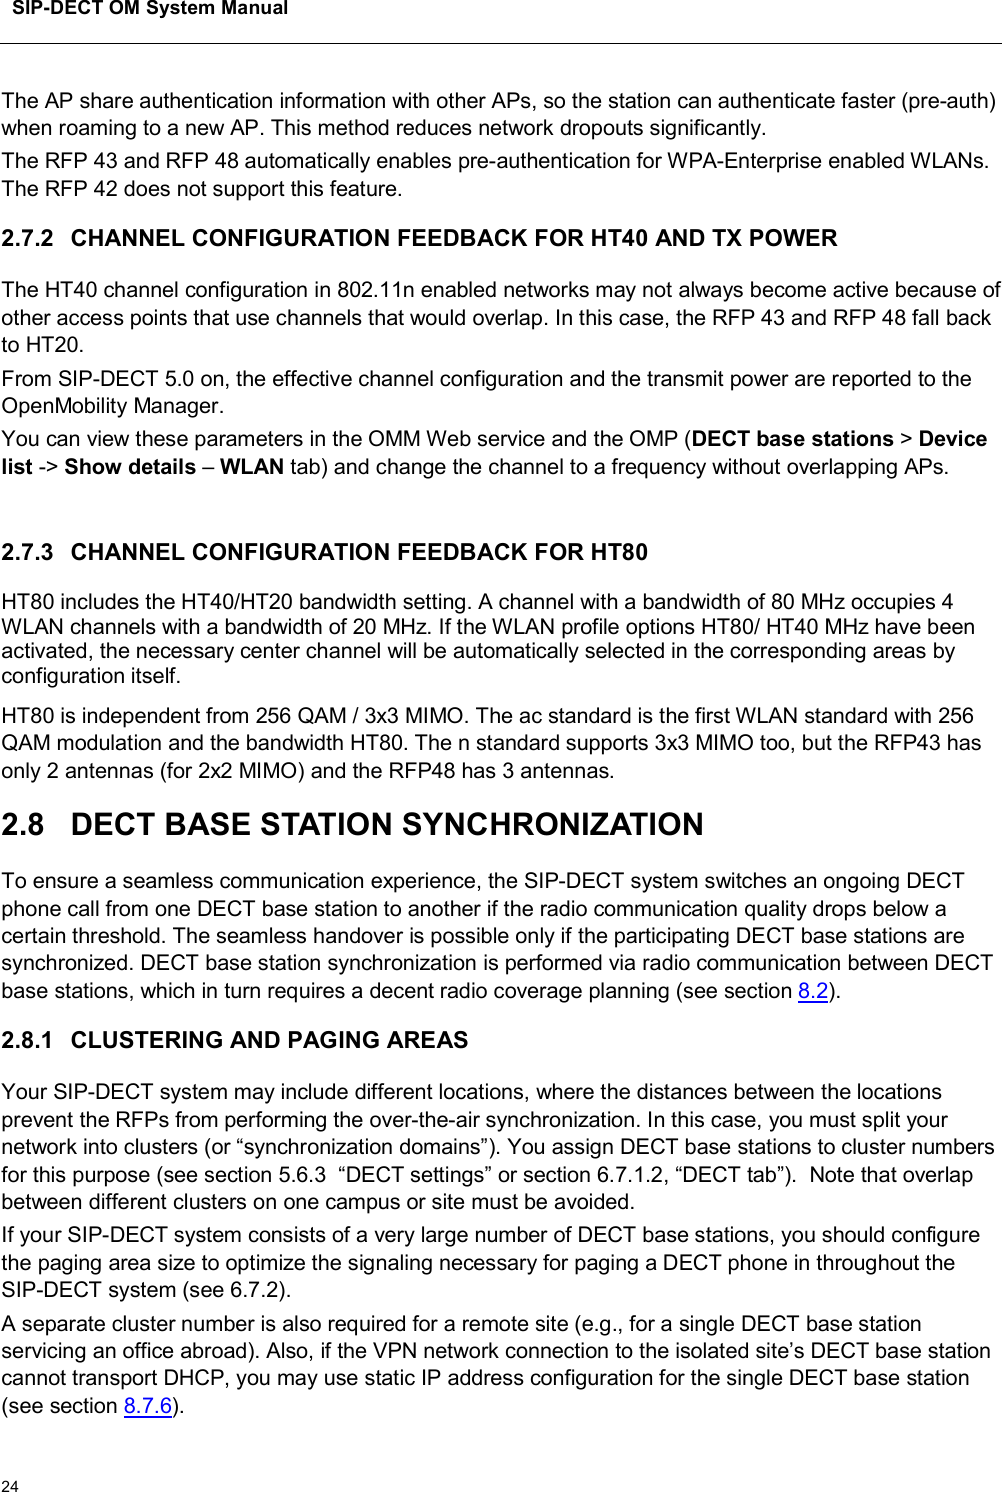 SIP-DECT OM System Manual24The AP share authentication information with other APs, so the station can authenticate faster (pre-auth) when roaming to a new AP. This method reduces network dropouts significantly.The RFP 43 and RFP 48 automatically enables pre-authentication for WPA-Enterprise enabled WLANs.The RFP 42 does not support this feature.2.7.2 CHANNEL CONFIGURATION FEEDBACK FOR HT40 AND TX POWERThe HT40 channel configuration in 802.11n enabled networks may not always become active because of other access points that use channels that would overlap. In this case, the RFP 43 and RFP 48 fall back to HT20.From SIP-DECT 5.0 on, the effective channel configuration and the transmit power are reported to the OpenMobility Manager. You can view these parameters in the OMM Web service and the OMP (DECT base stations &gt;Device list -&gt; Show details –WLAN tab) and change the channel to a frequency without overlapping APs.2.7.3 CHANNEL CONFIGURATION FEEDBACK FOR HT80HT80 includes the HT40/HT20 bandwidth setting. A channel with a bandwidth of 80 MHz occupies 4 WLAN channels with a bandwidth of 20 MHz. If the WLAN profile options HT80/ HT40 MHz have been activated, the necessary center channel will be automatically selected in the corresponding areas by configuration itself.HT80 is independent from 256 QAM / 3x3 MIMO. The ac standard is the first WLAN standard with 256 QAM modulation and the bandwidth HT80. The n standard supports 3x3 MIMO too, but the RFP43 has only 2 antennas (for 2x2 MIMO) and the RFP48 has 3 antennas.2.8 DECT BASE STATION SYNCHRONIZATIONTo ensure a seamless communication experience, the SIP-DECT system switches an ongoing DECT phone call from one DECT base station to another if the radio communication quality drops below a certain threshold. The seamless handover is possible only if the participating DECT base stations are synchronized. DECT base station synchronization is performed via radio communication between DECT base stations, which in turn requires a decent radio coverage planning (see section 8.2).2.8.1 CLUSTERING AND PAGING AREASYour SIP-DECT system may include different locations, where the distances between the locations prevent the RFPs from performing the over-the-air synchronization. In this case, you must split your network into clusters (or “synchronization domains”). You assign DECT base stations to cluster numbers for this purpose (see section 5.6.3 “DECT settings” or section 6.7.1.2, “DECT tab”).  Note that overlap between different clusters on one campus or site must be avoided.If your SIP-DECT system consists of a very large number of DECT base stations, you should configure the paging area size to optimize the signaling necessary for paging a DECT phone in throughout the SIP-DECT system (see 6.7.2).A separate cluster number is also required for a remote site (e.g., for a single DECT base station servicing an office abroad). Also, if the VPN network connection to the isolated site’s DECT base station cannot transport DHCP, you may use static IP address configuration for the single DECT base station (see section 8.7.6).